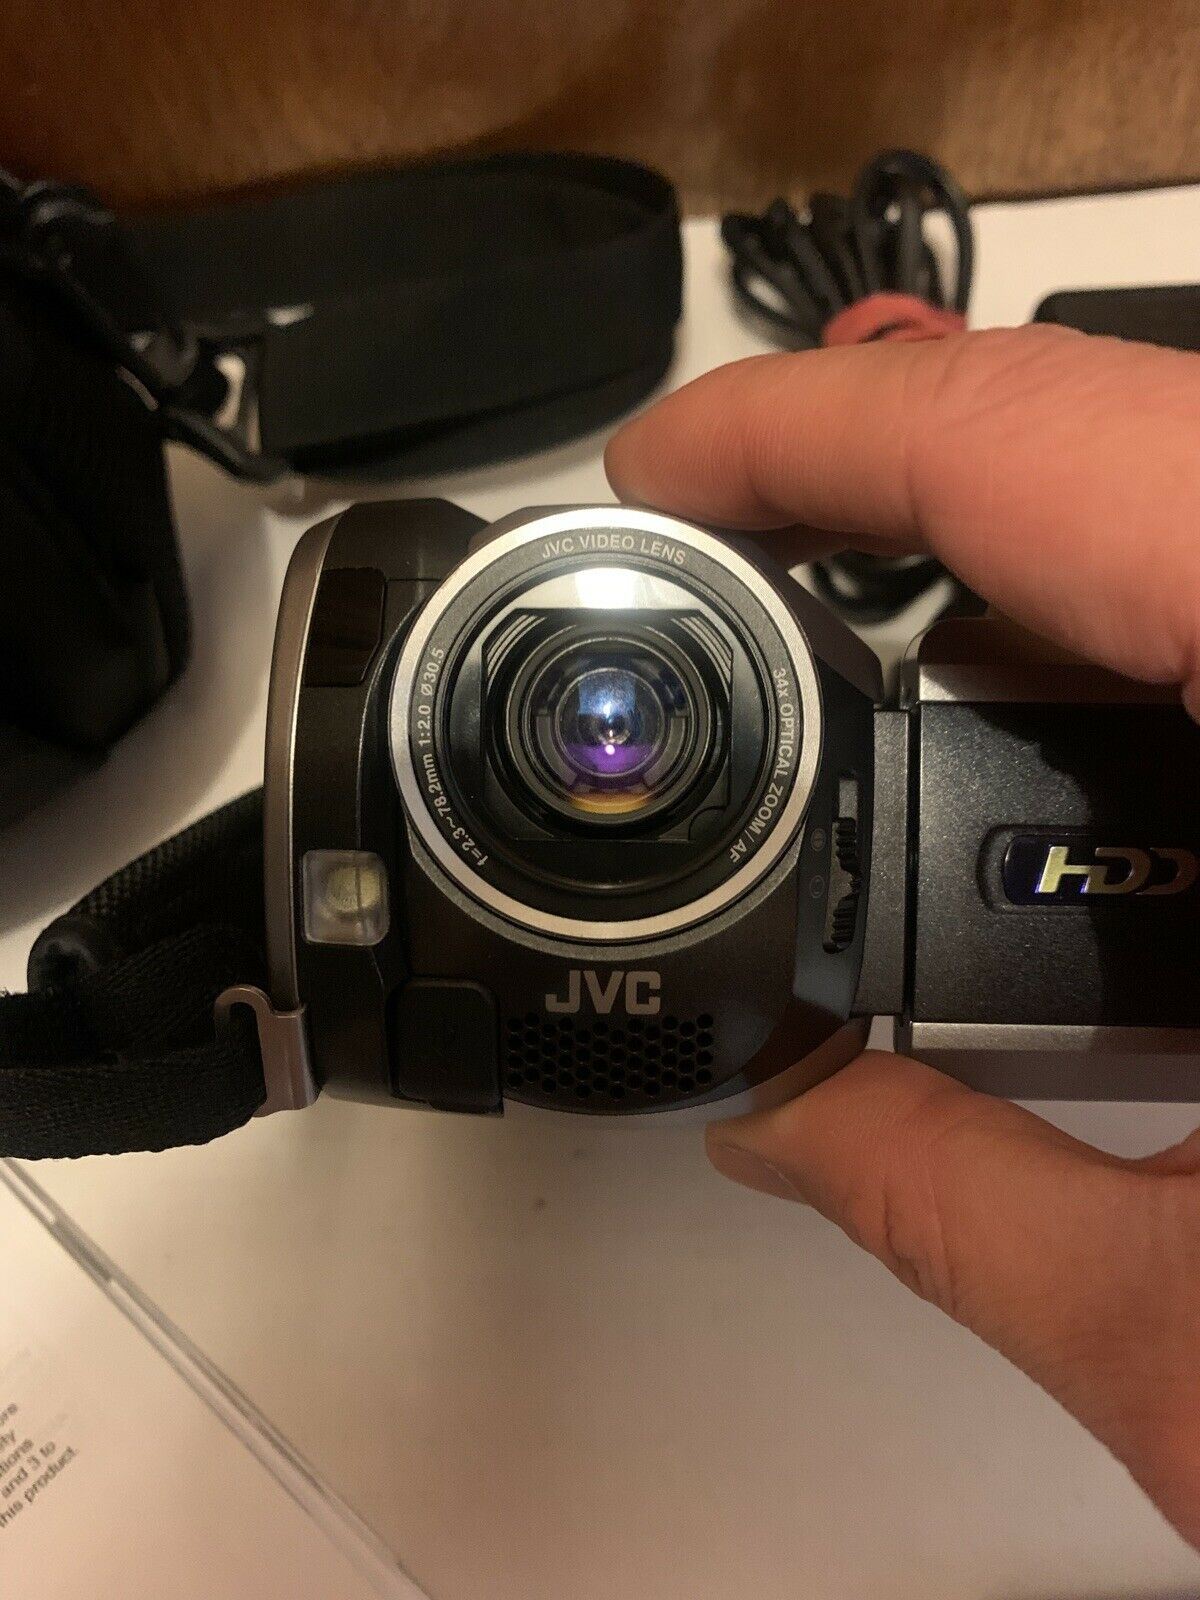 JVC Everio GZ-MG145AA Camcorder 40gb HDD With Remote, Charger & Camera Case